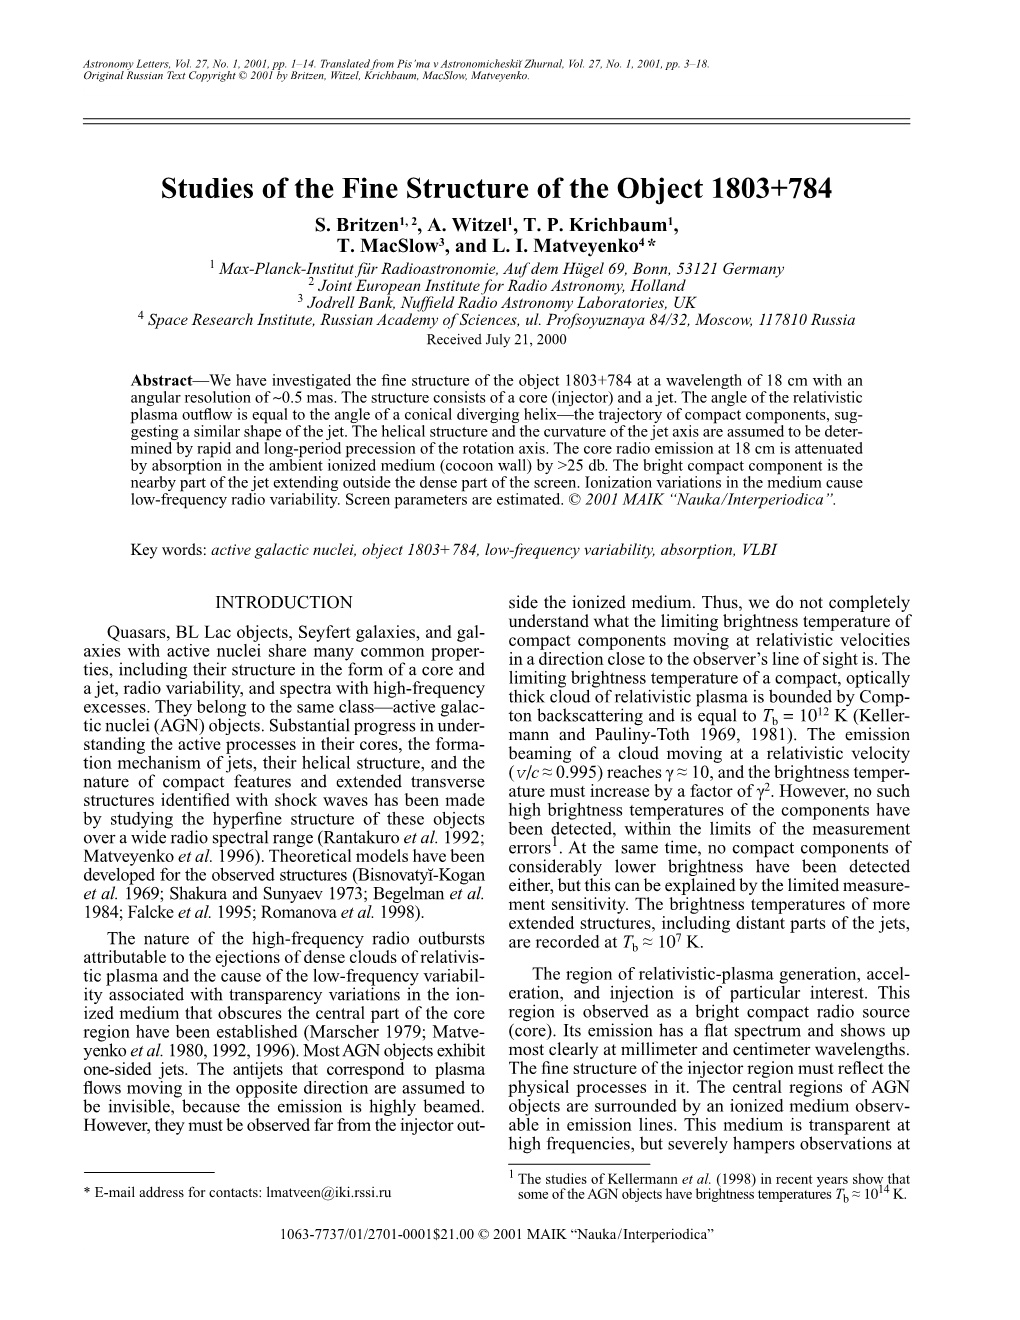 Studies of the Fine Structure of the Object 1803+784 S